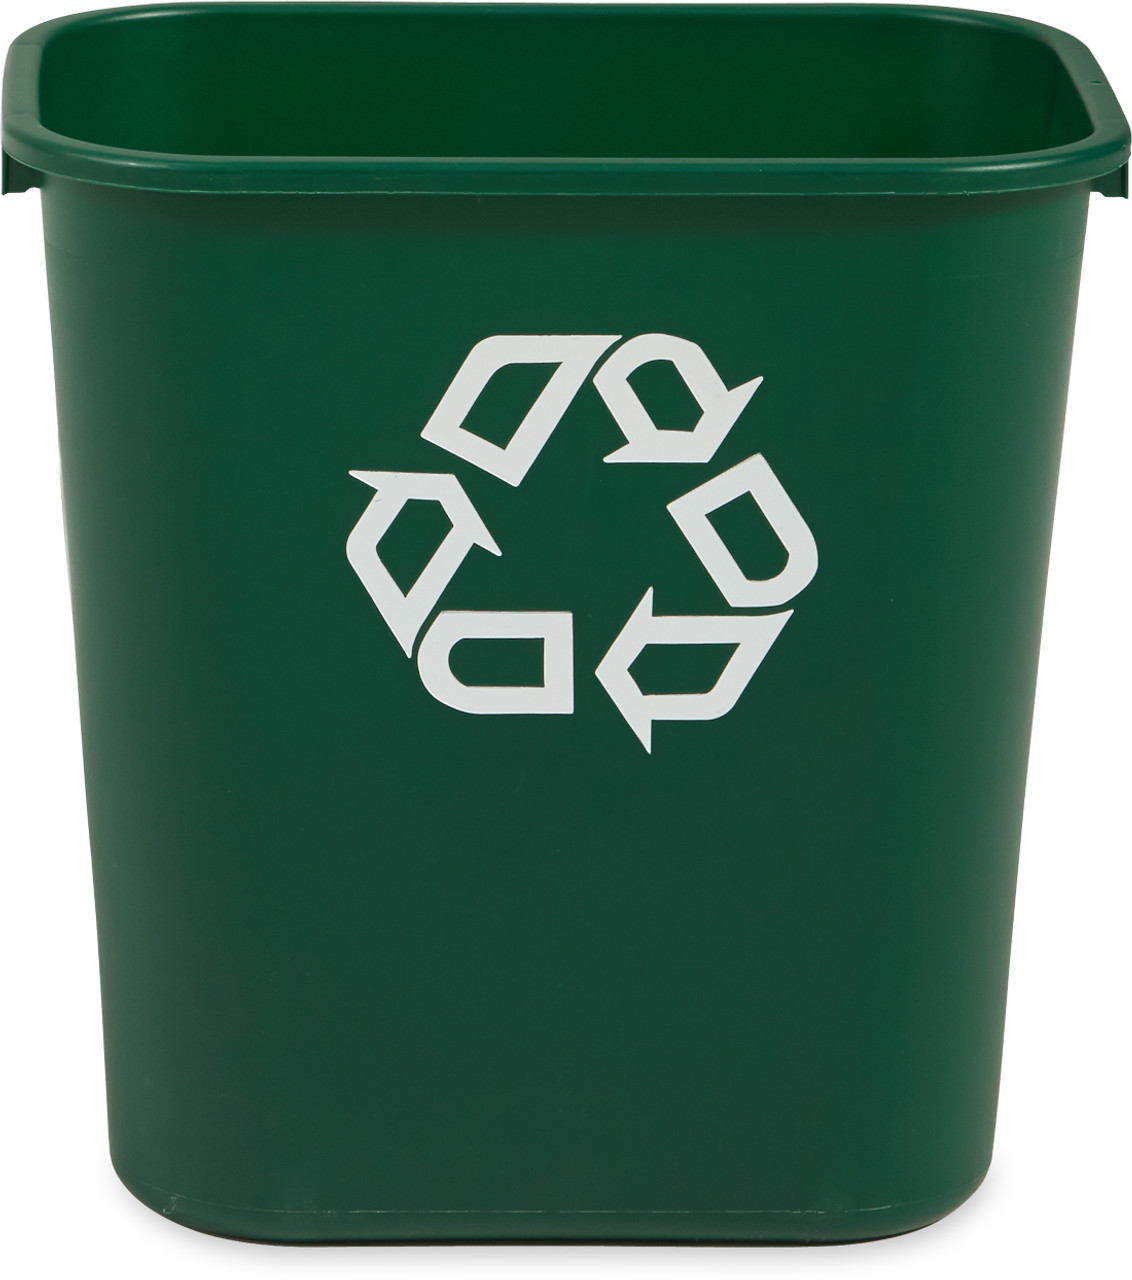 FG295606GRN - Wide, open-top design makes disposing of waste and recycling easy